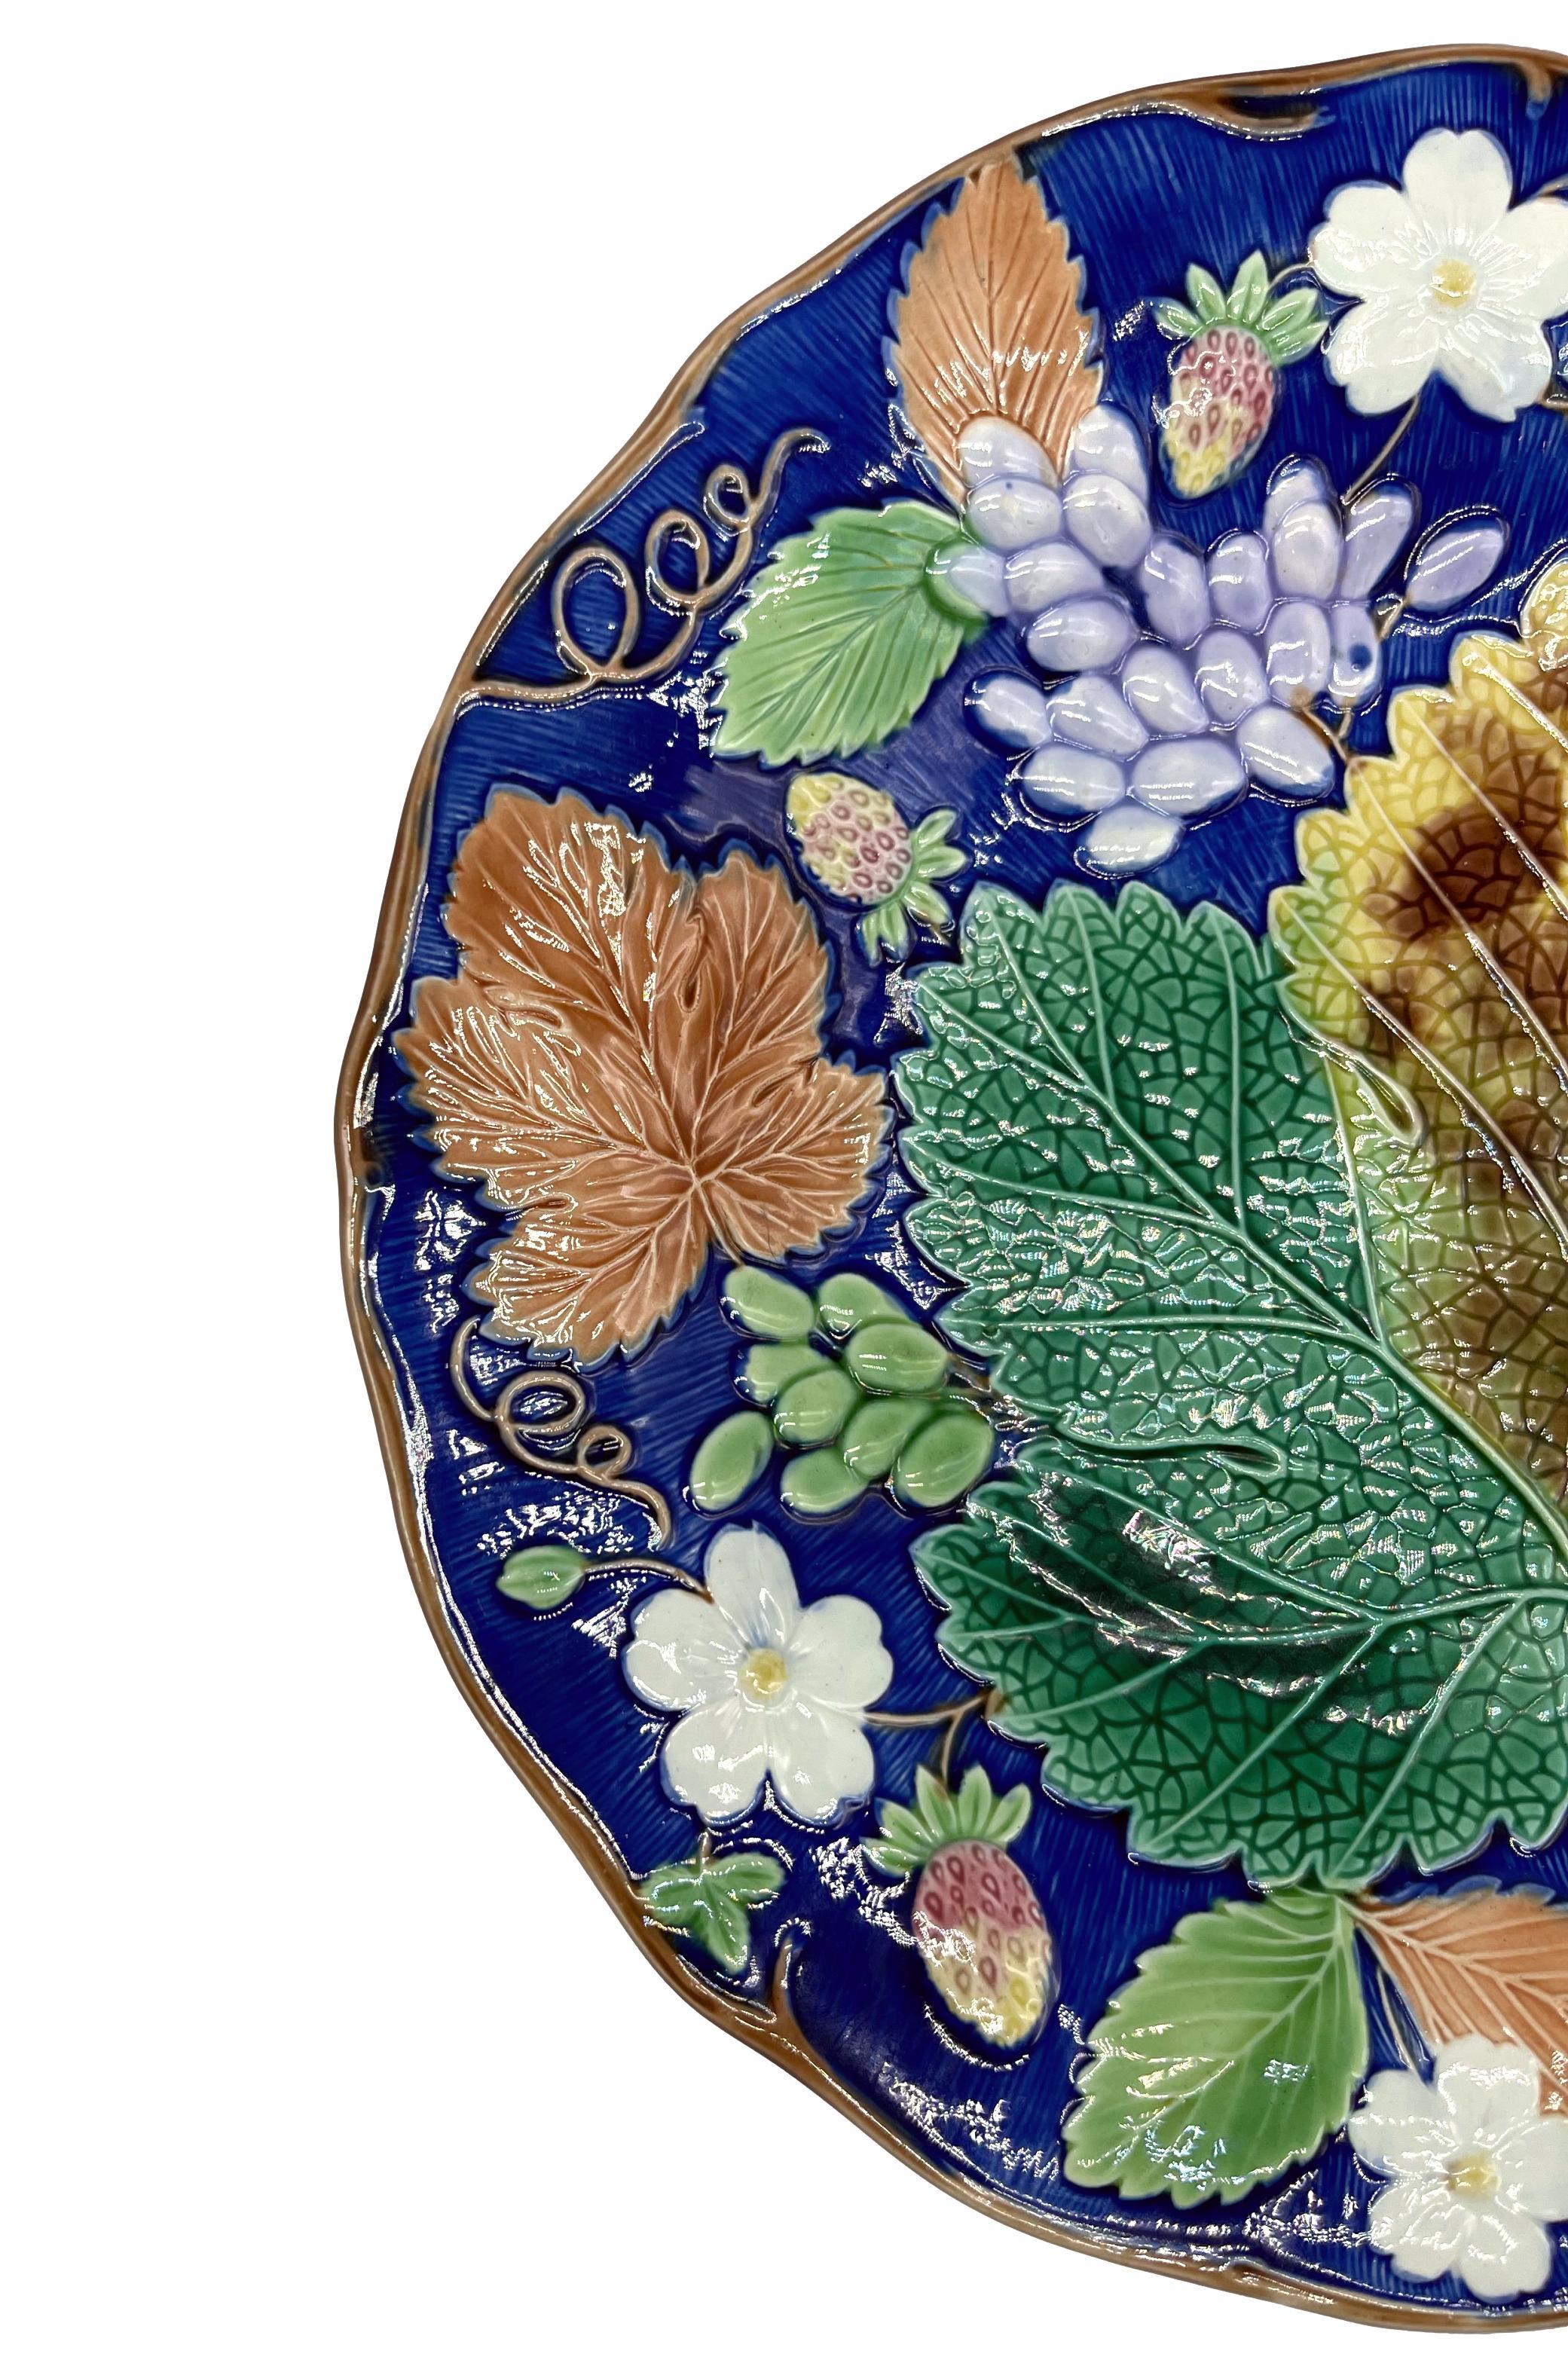 Wedgwood Majolica 'Vine & Strawberry' plate, English, with a large central green grape leaf, purple grapes, strawberries and blossom on a cobalt ground (rare coloration). Impressed marks to reverse: 'WEDGWOOD' and Wedgwood date code for 1878.
For